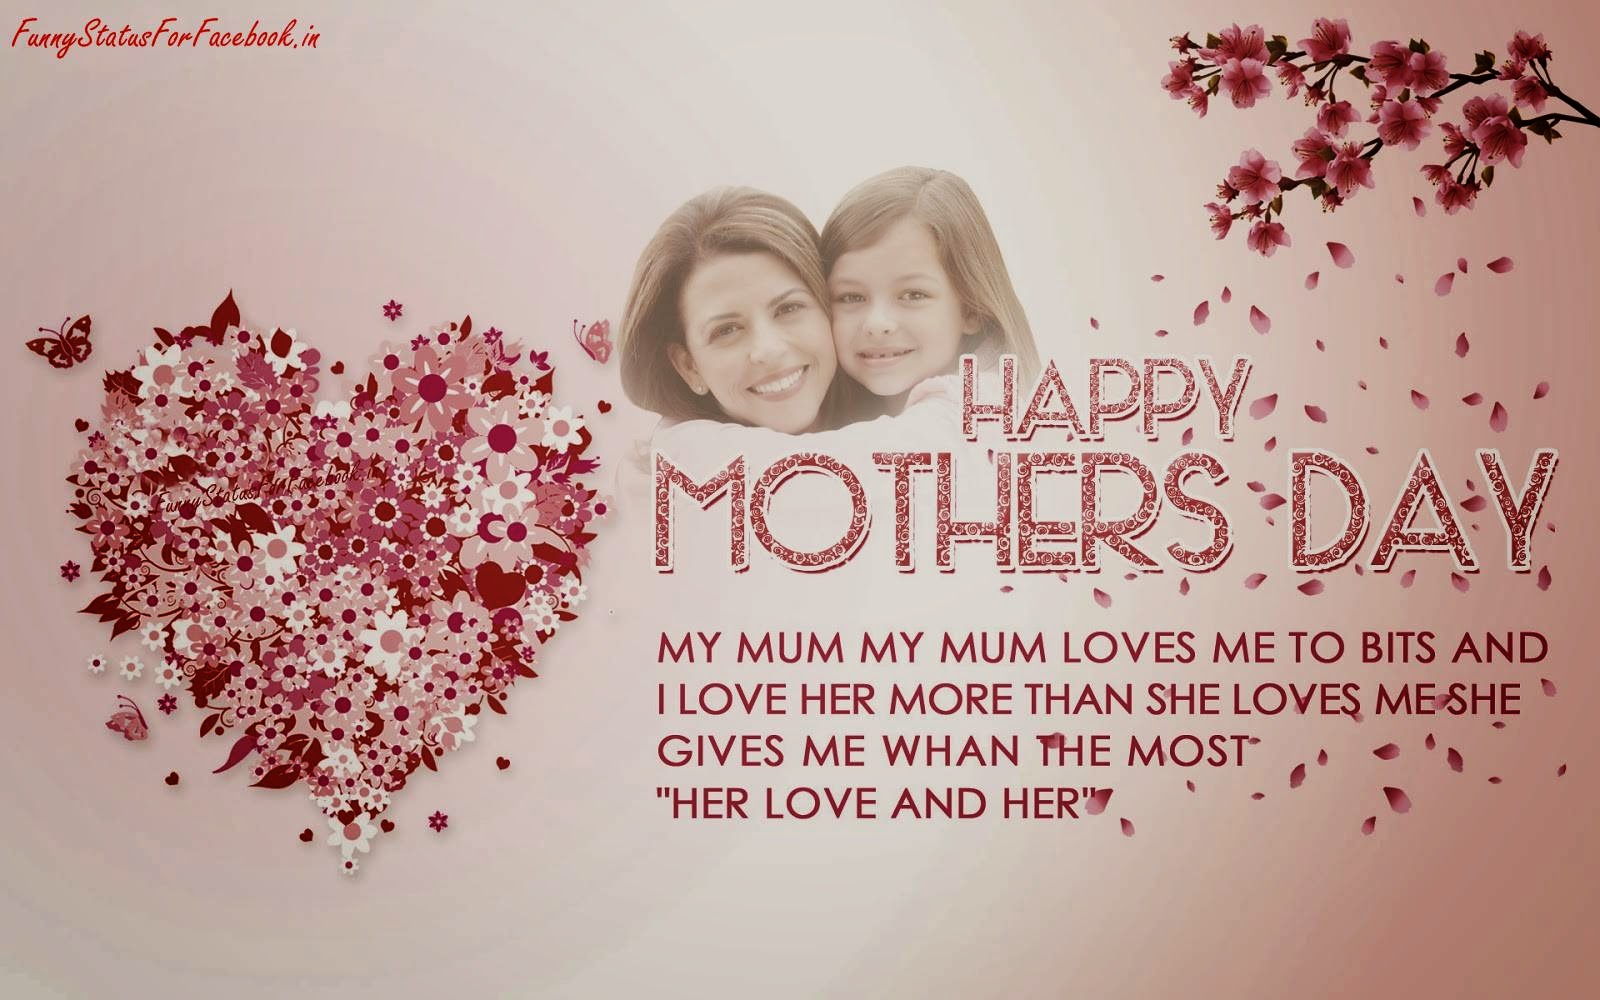 Love Her More Than She Loves Me She Gives Me Whan The - Mothers Day Message For Sisters - HD Wallpaper 